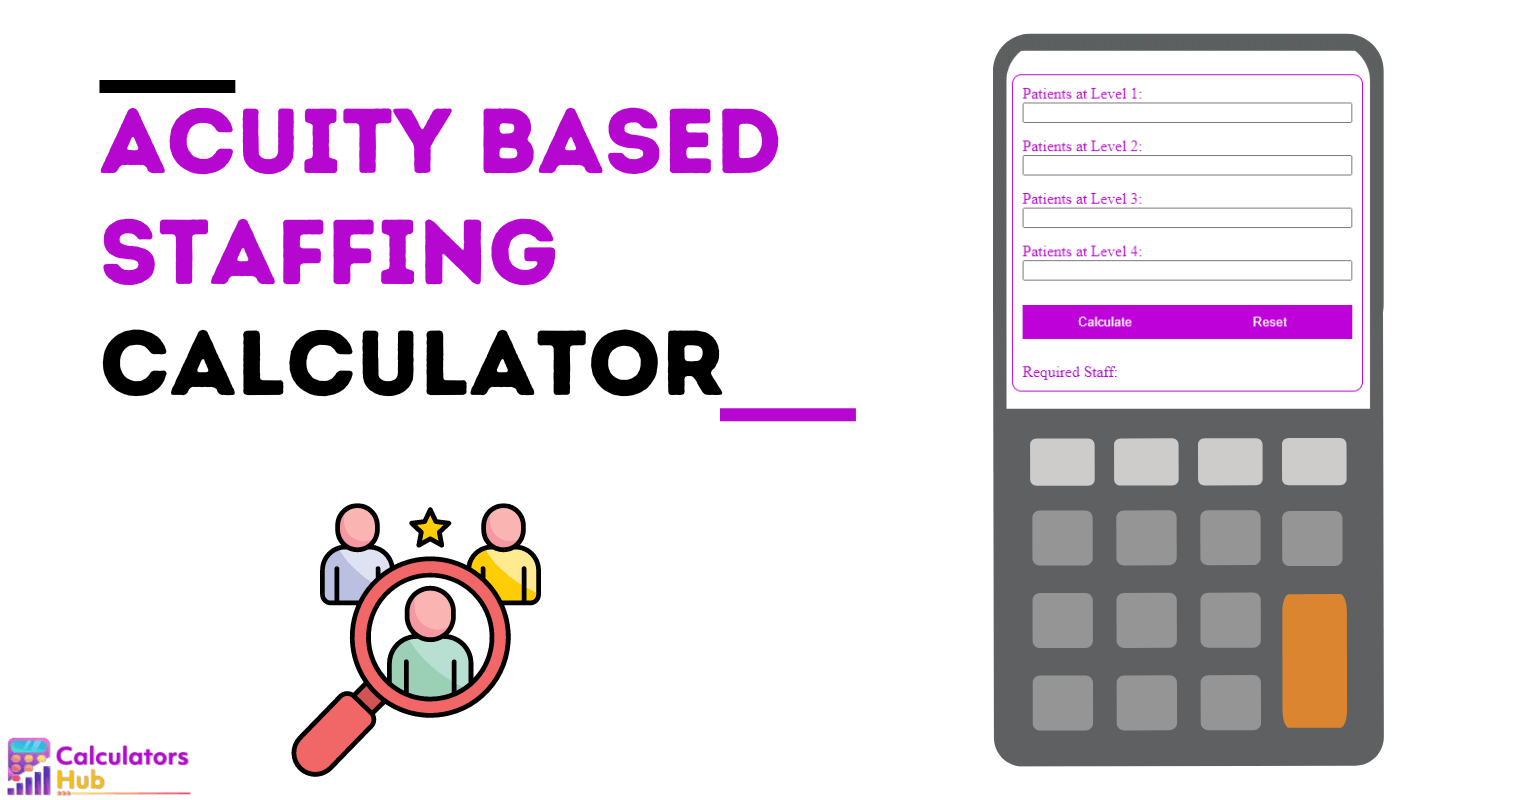 Acuity Based Staffing Calculator